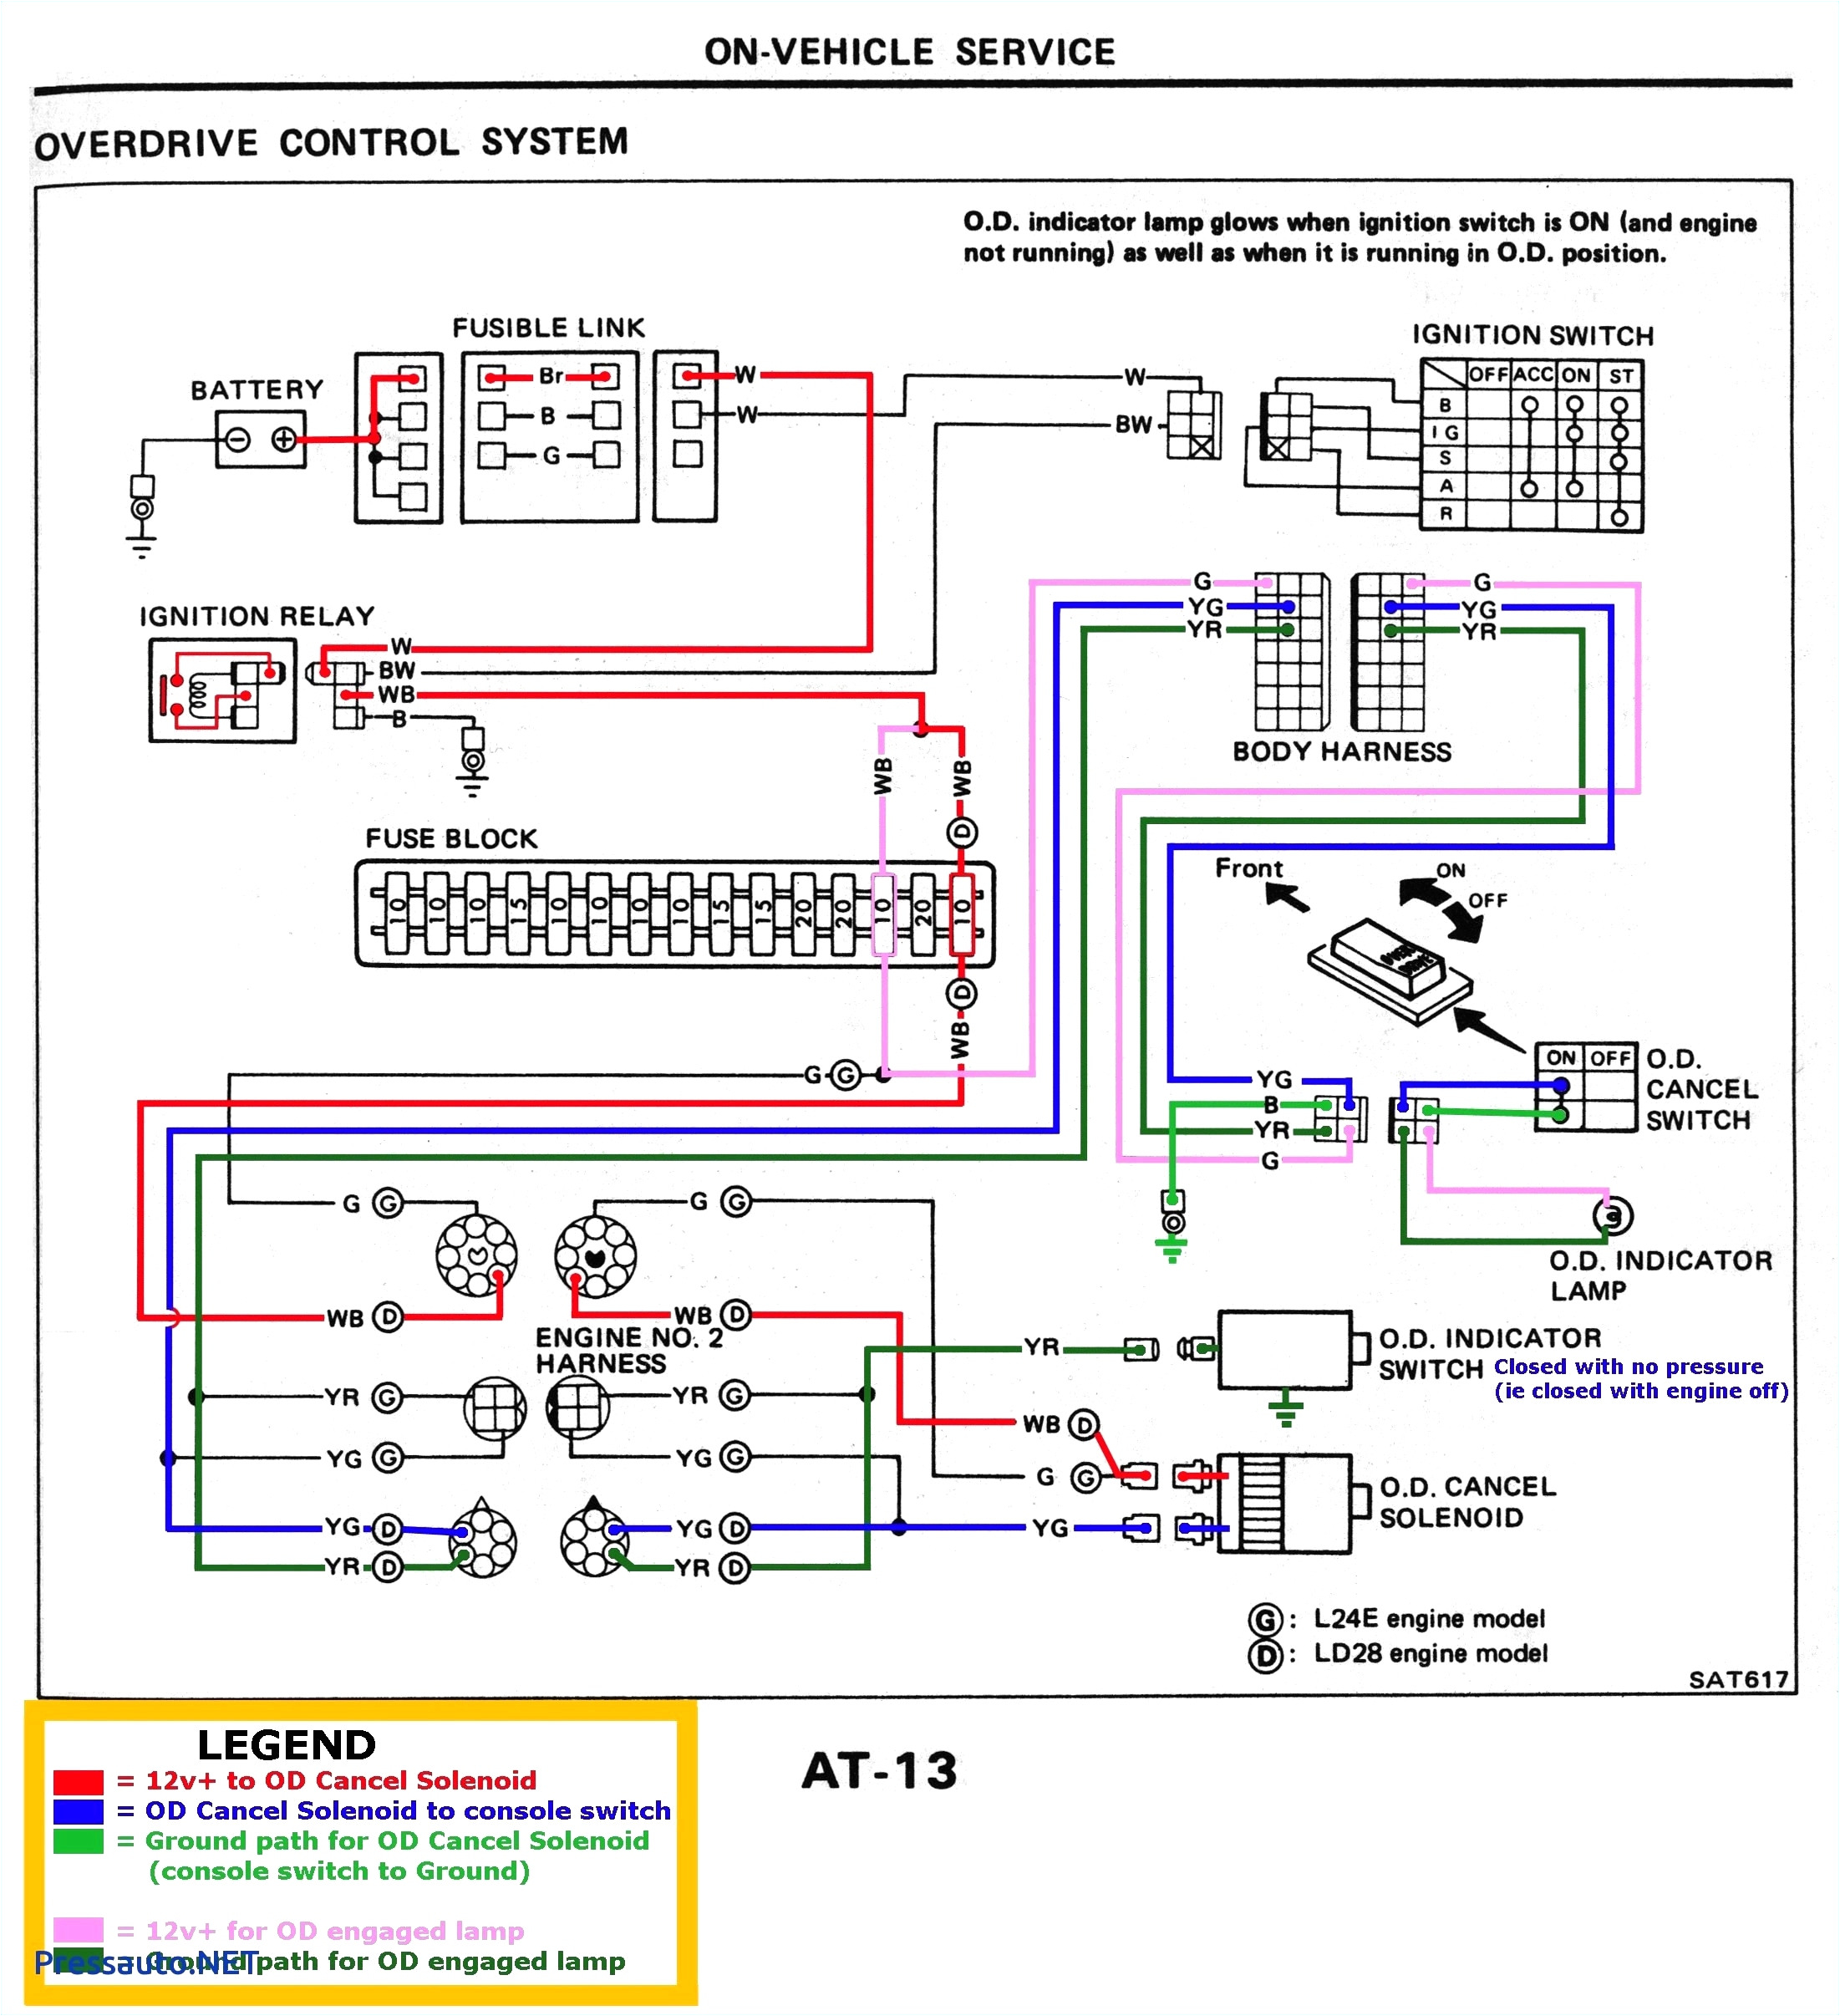 briggs and stratton v twin wiring diagram inspirational briggs and stratton ignition coil wiring diagram best